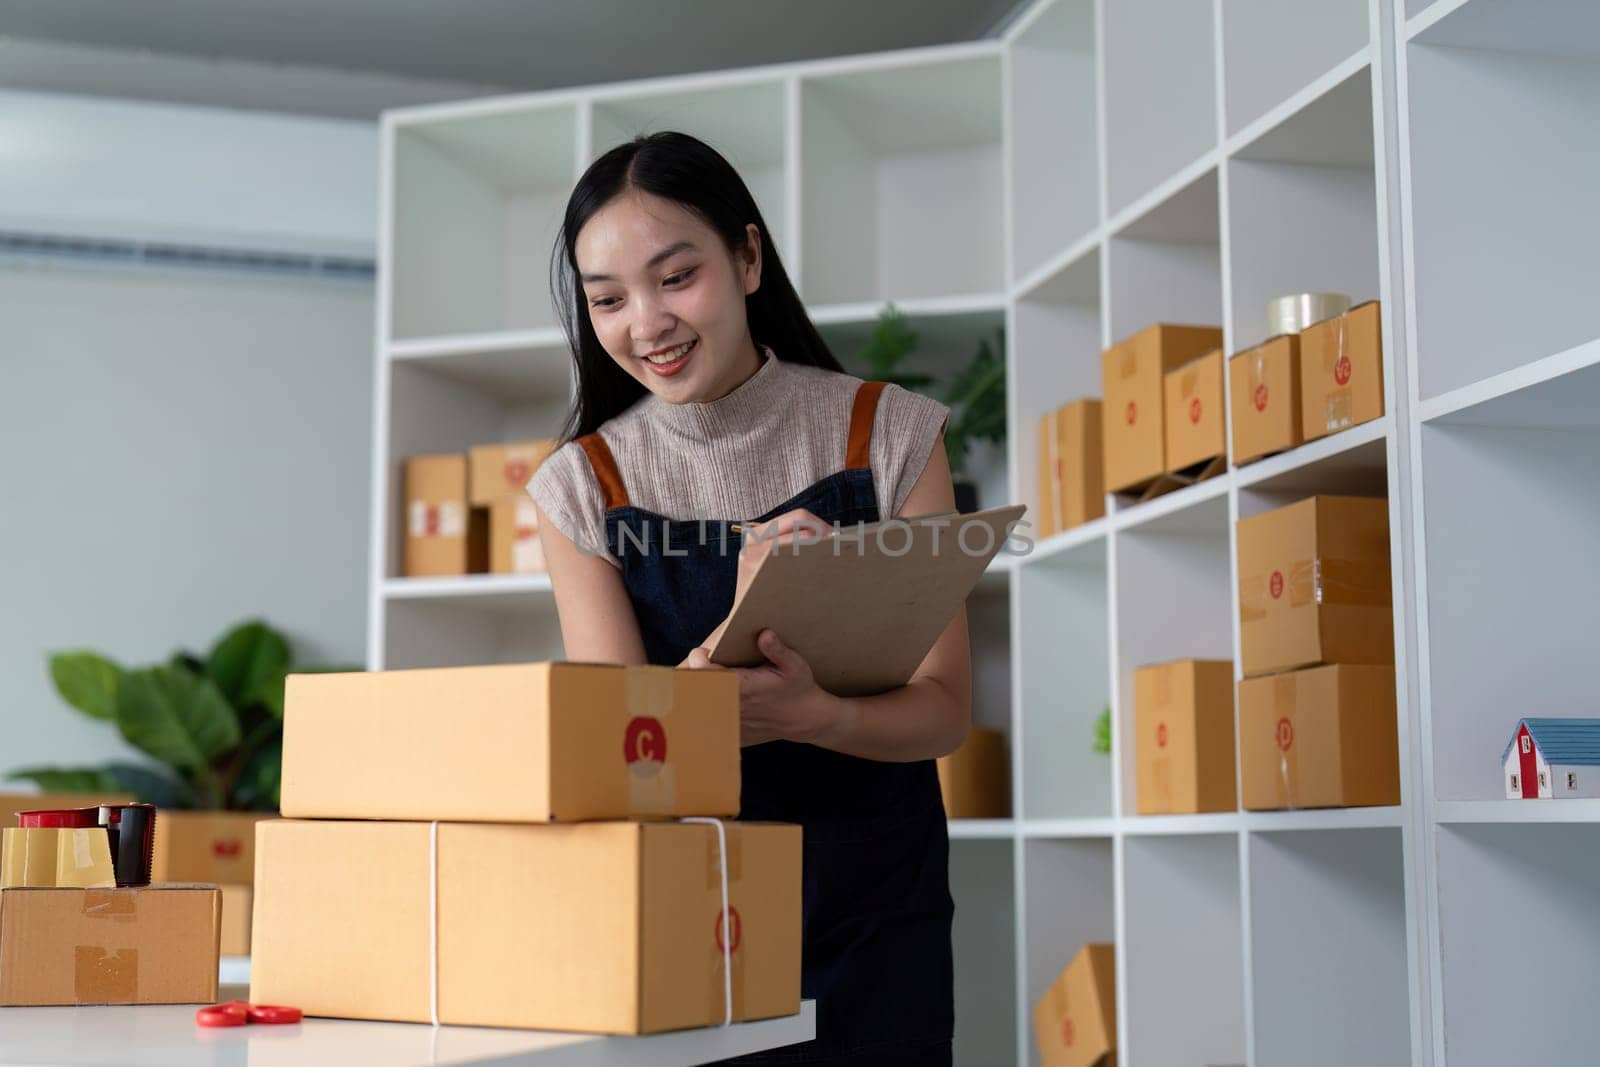 Woman entrepreneur prepare parcel box and check online order on laptop computer for commercial checking delivery. online marketing, packing box, SME seller. startup business concept.